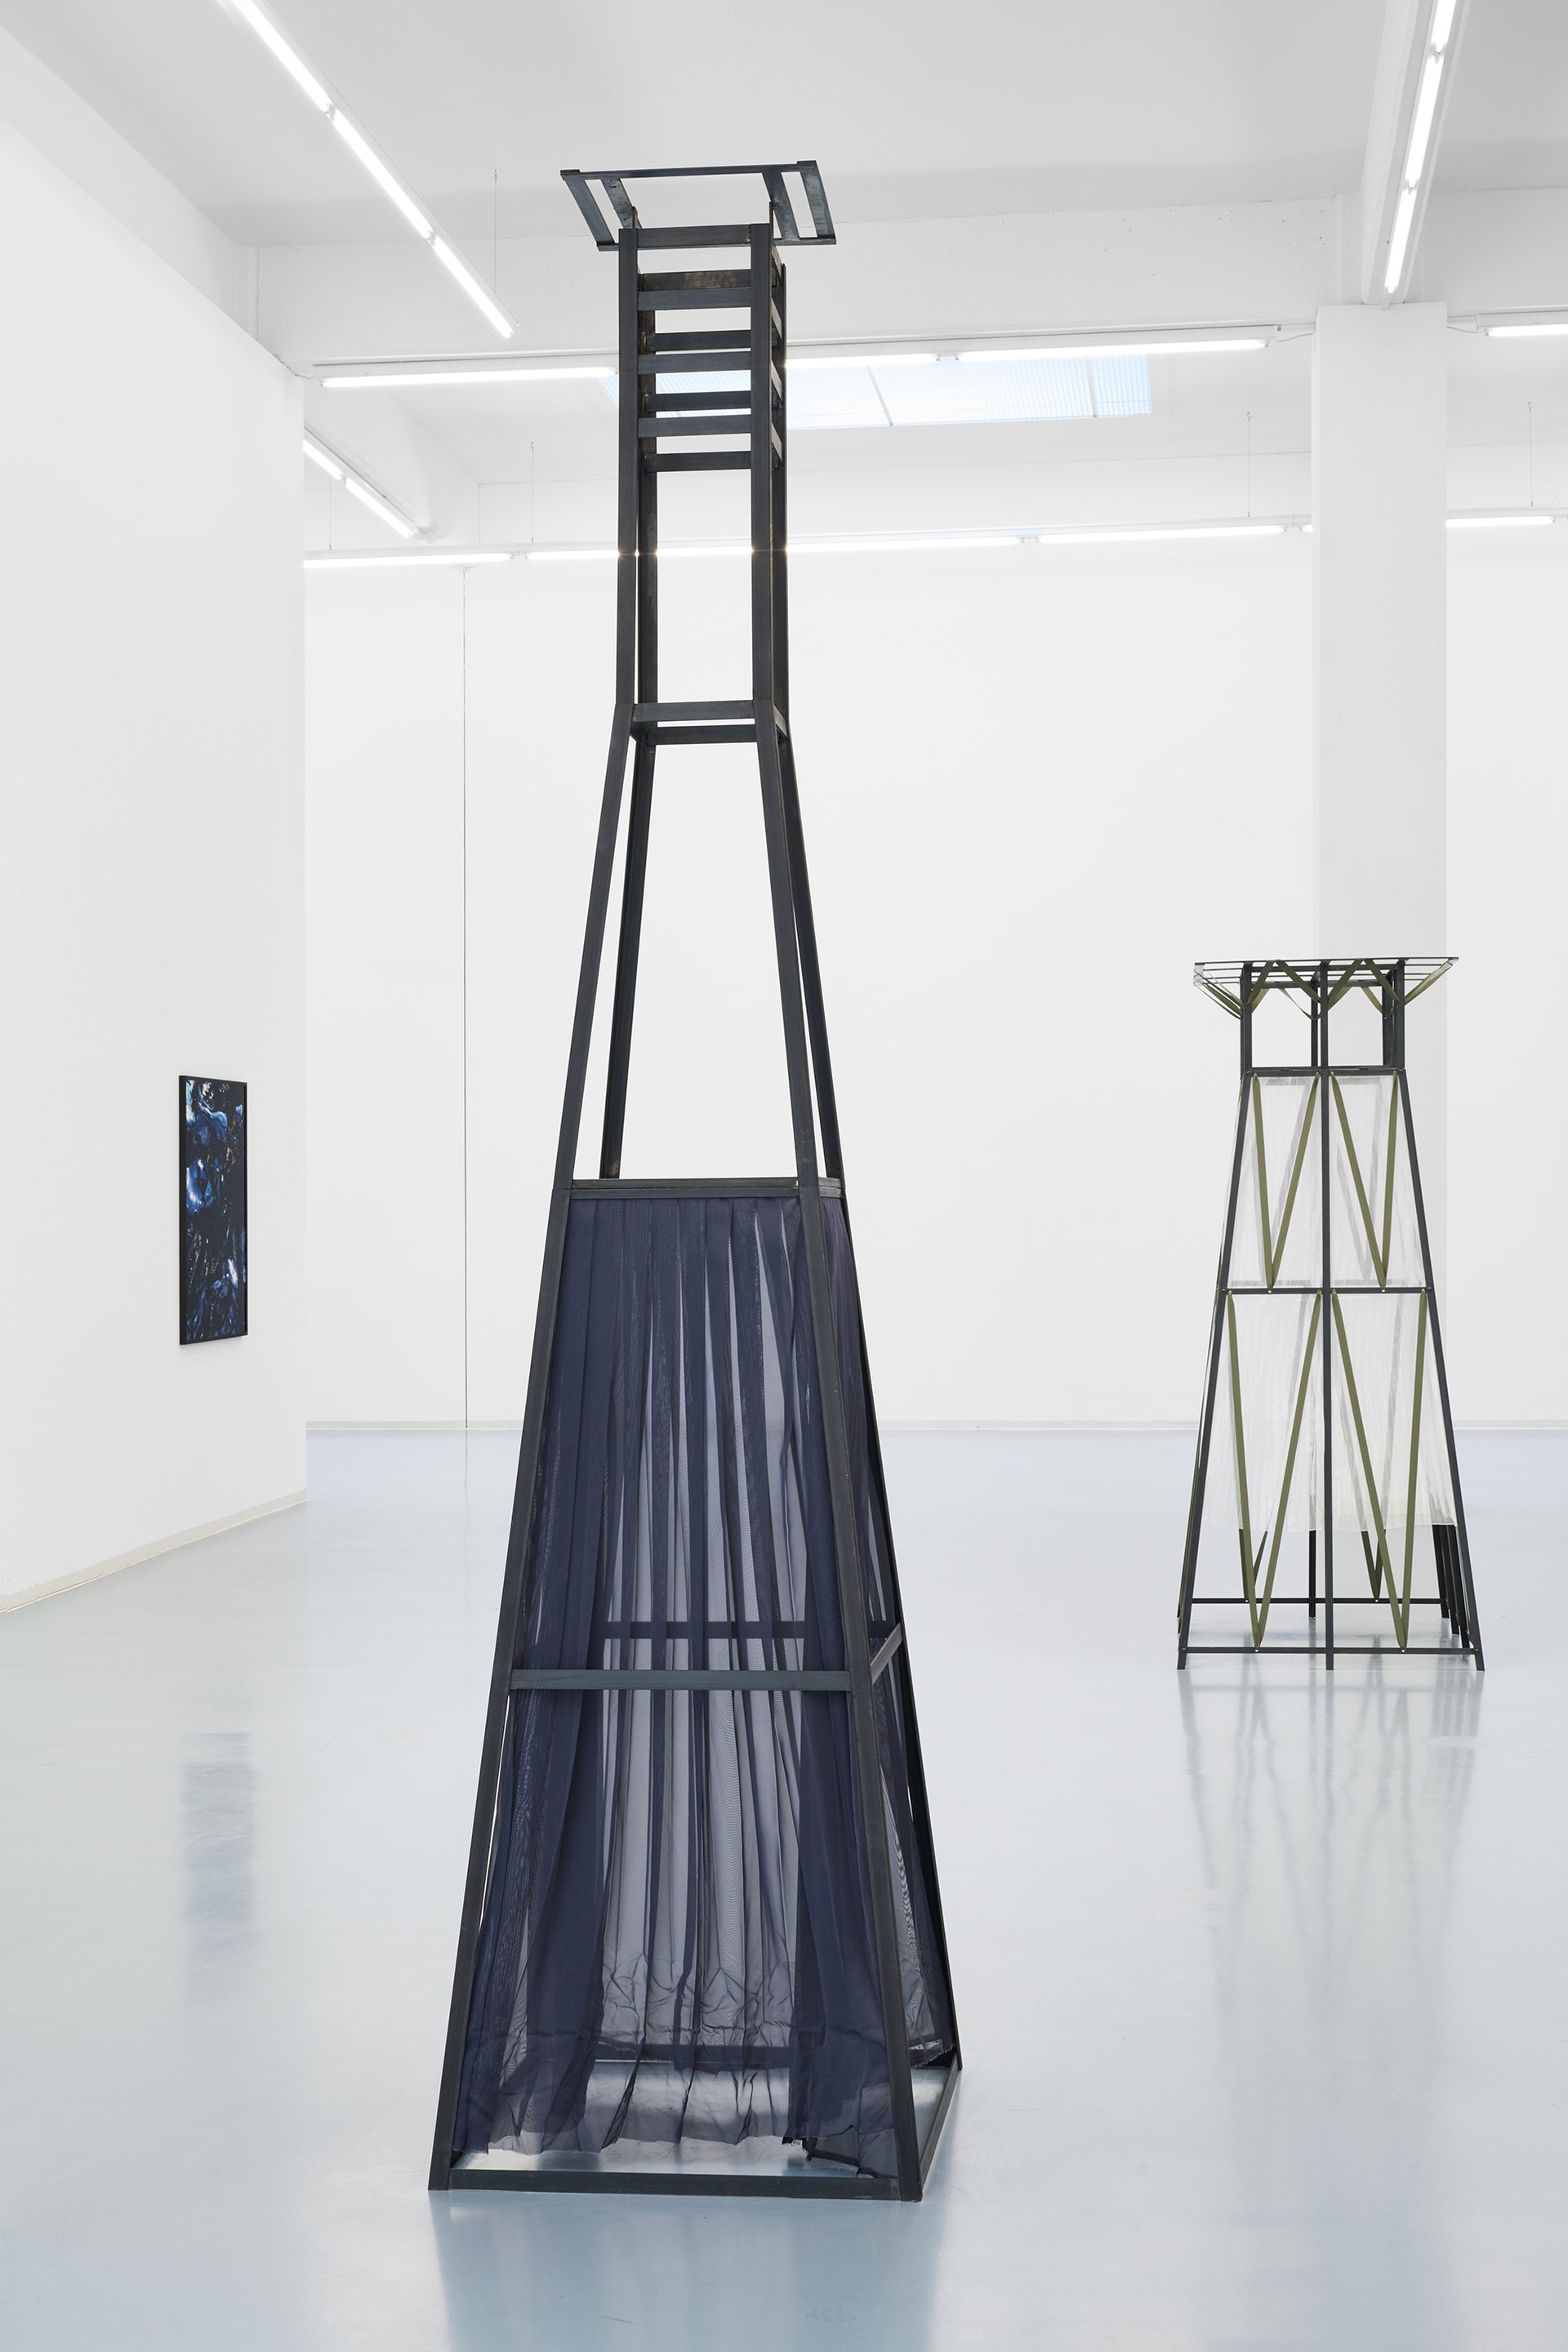 Lucie Stahl: Seven Sisters, installation view, Bonner Kunstverein, 2022.  Courtesy the artist, Cabinet Gallery, London, dépendance, Brussels, Fitzpatrick Gallery, Paris and Los Angeles, and Galerie Meyer Kainer, Vienna. Photo: Mareike Tocha.